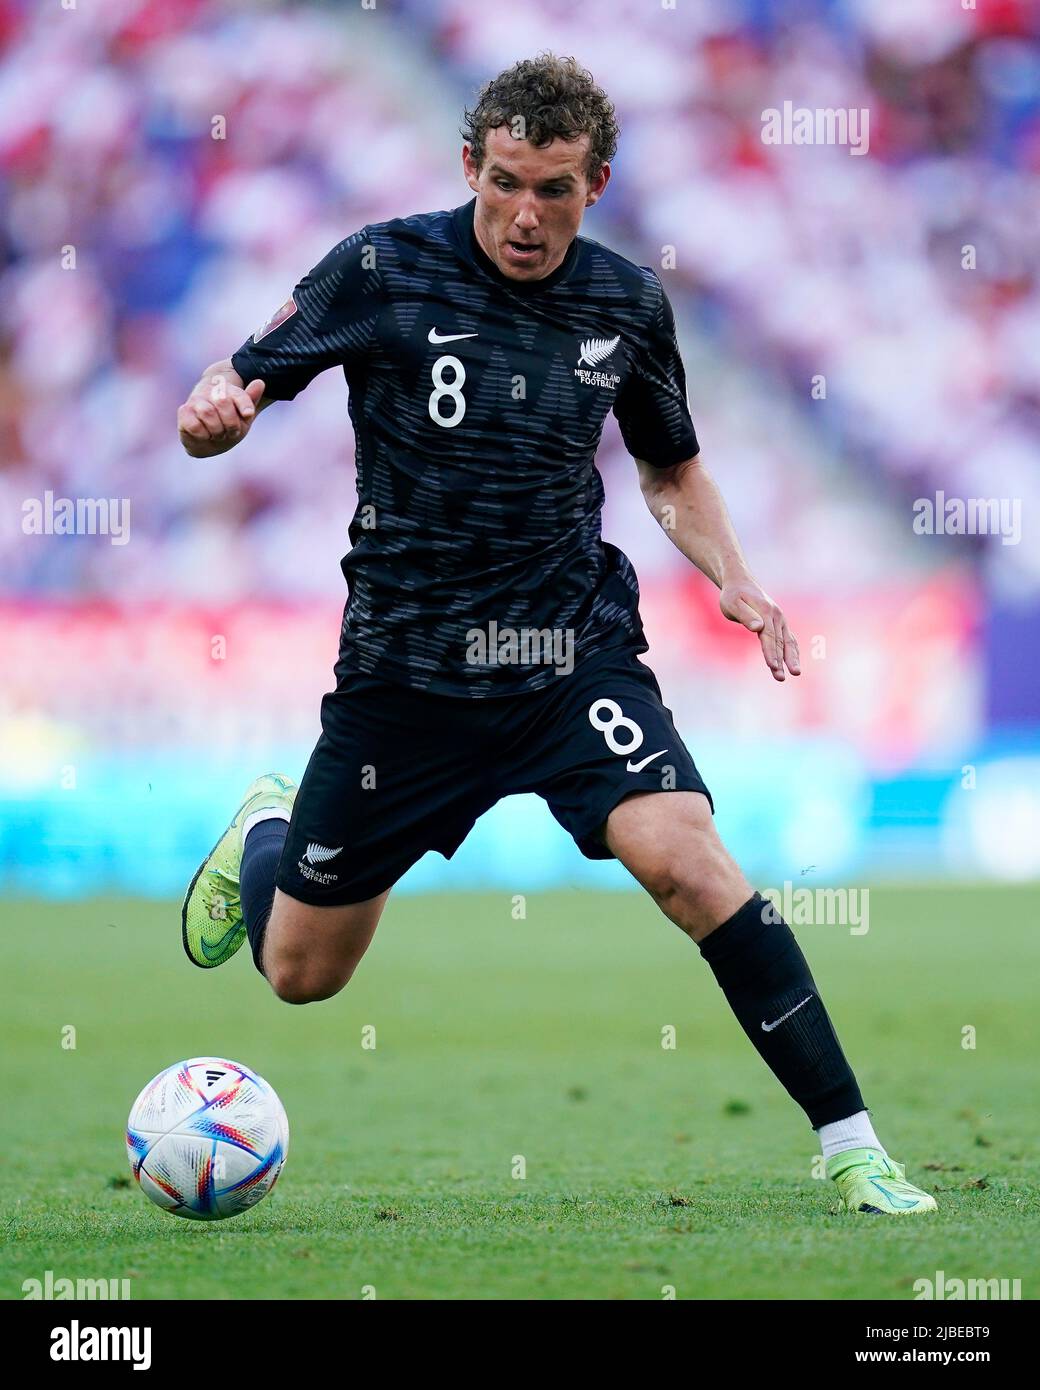 Barcelona, Spain. June 5, 2022, Joe Bell of New Zealand during the friendly match between Peru and New Zealand played at RCDE Stadium on June 5, 2022 in Barcelona, Spain. (Photo by Bagu Blanco / PRESSINPHOTO) Stock Photo